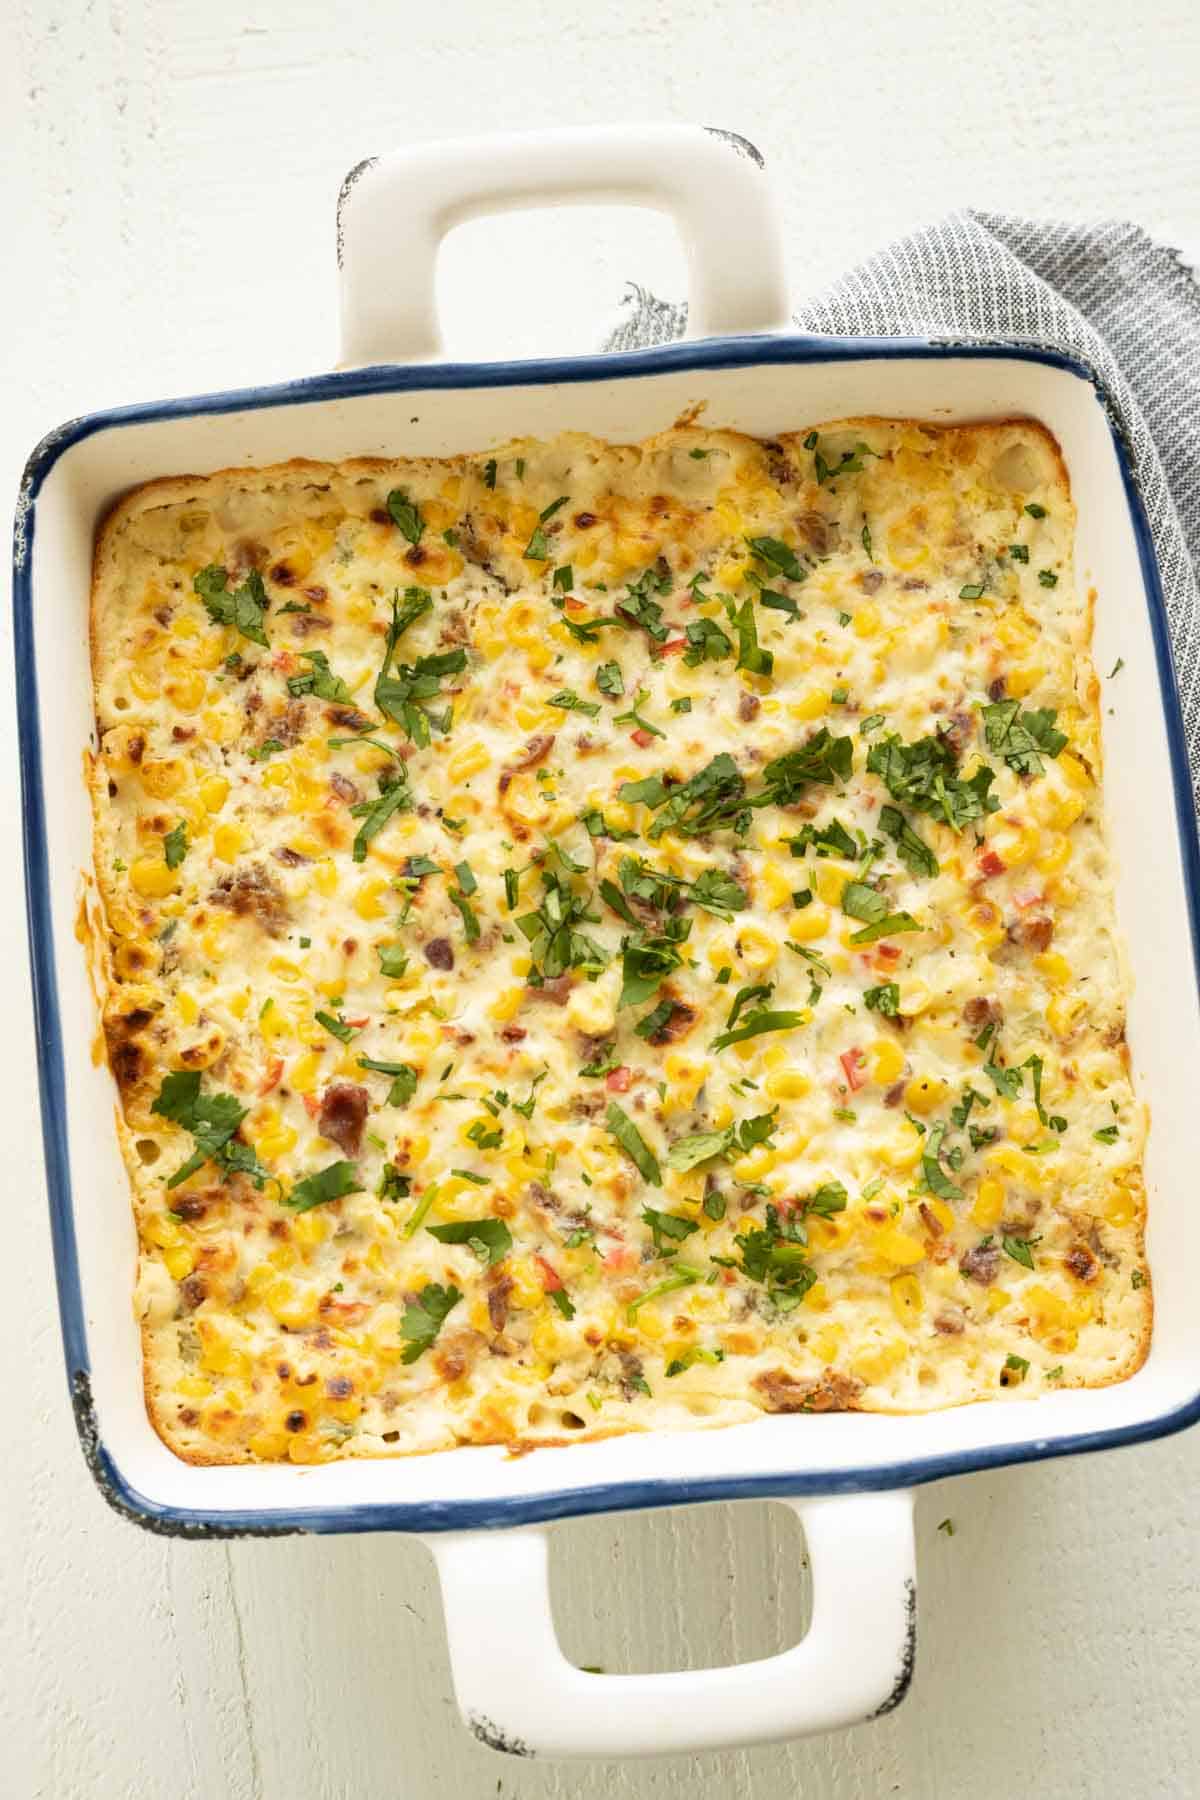 A hot cheesy corn dip sprinkled with cilantro in a white baking dish.